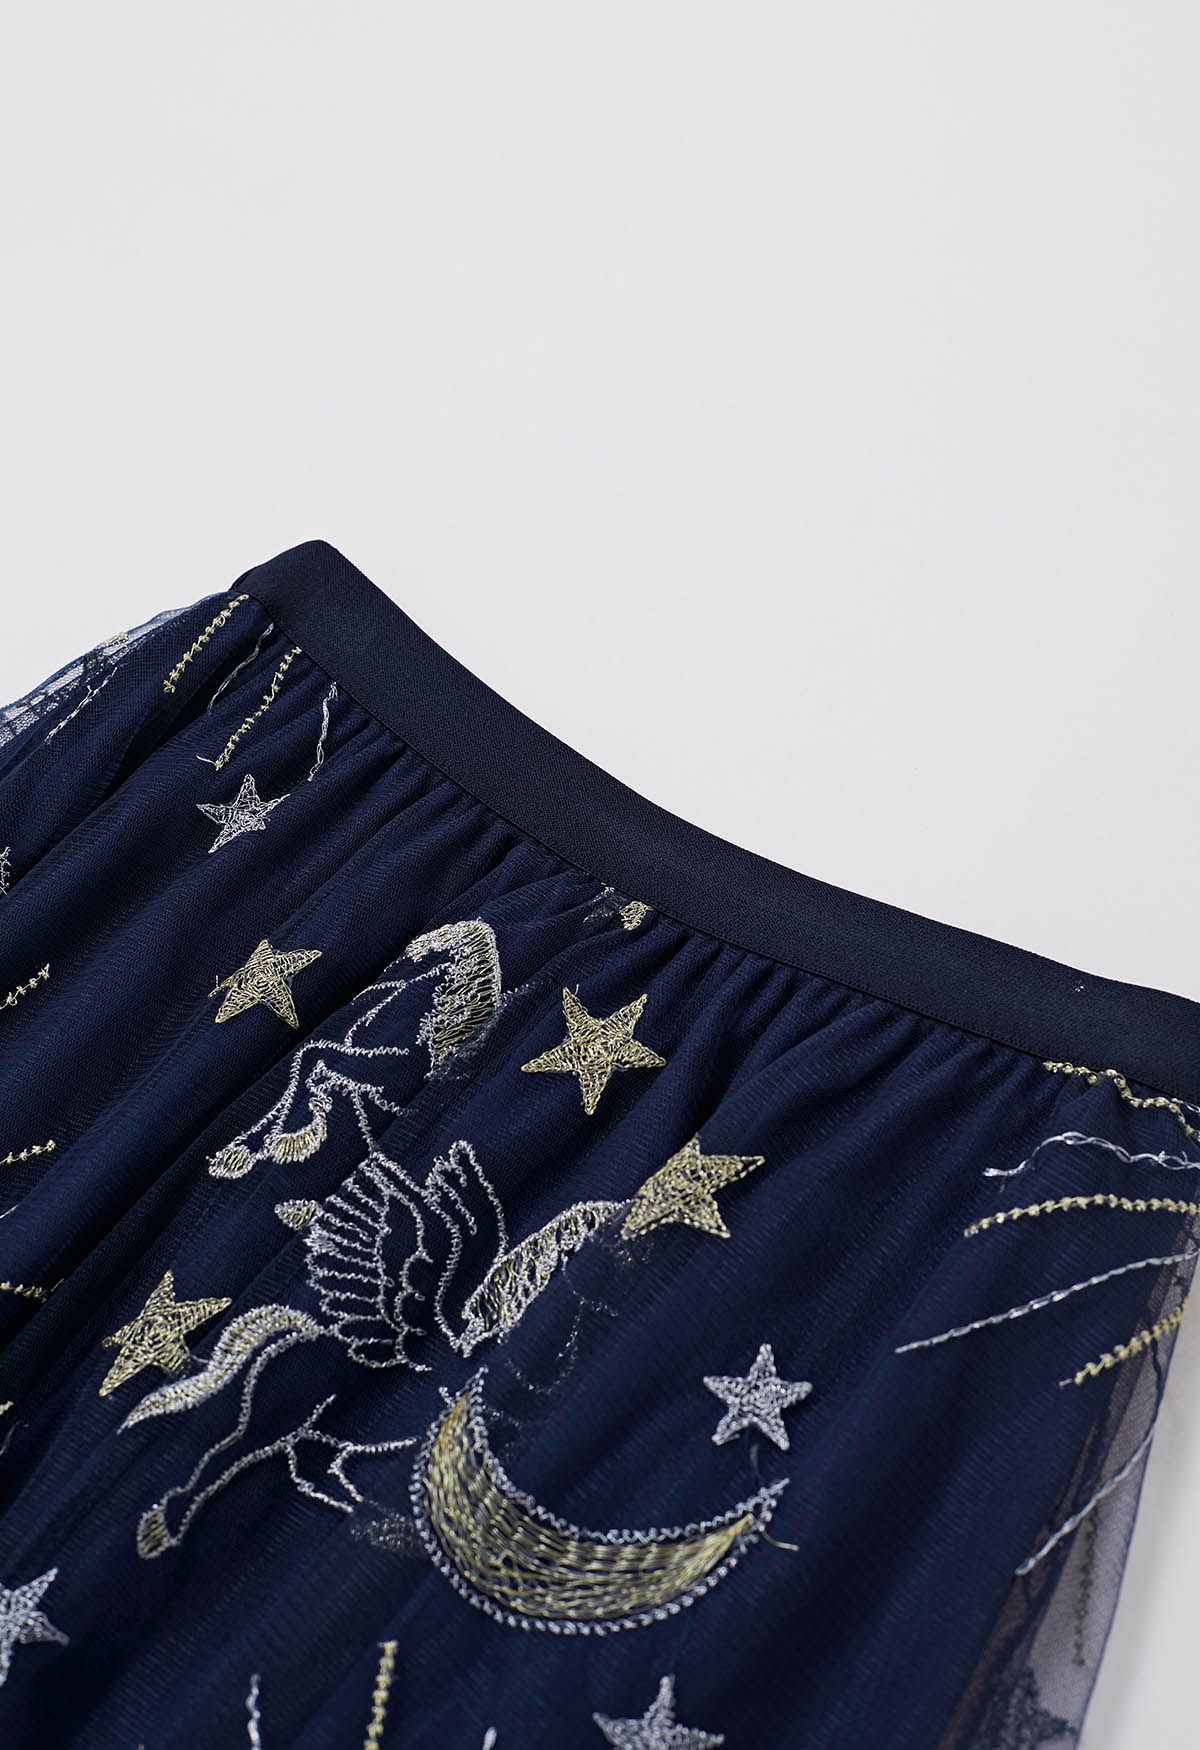 Mysterious Night Moon and Star Embroidered Mesh Tulle Skirt in Navy